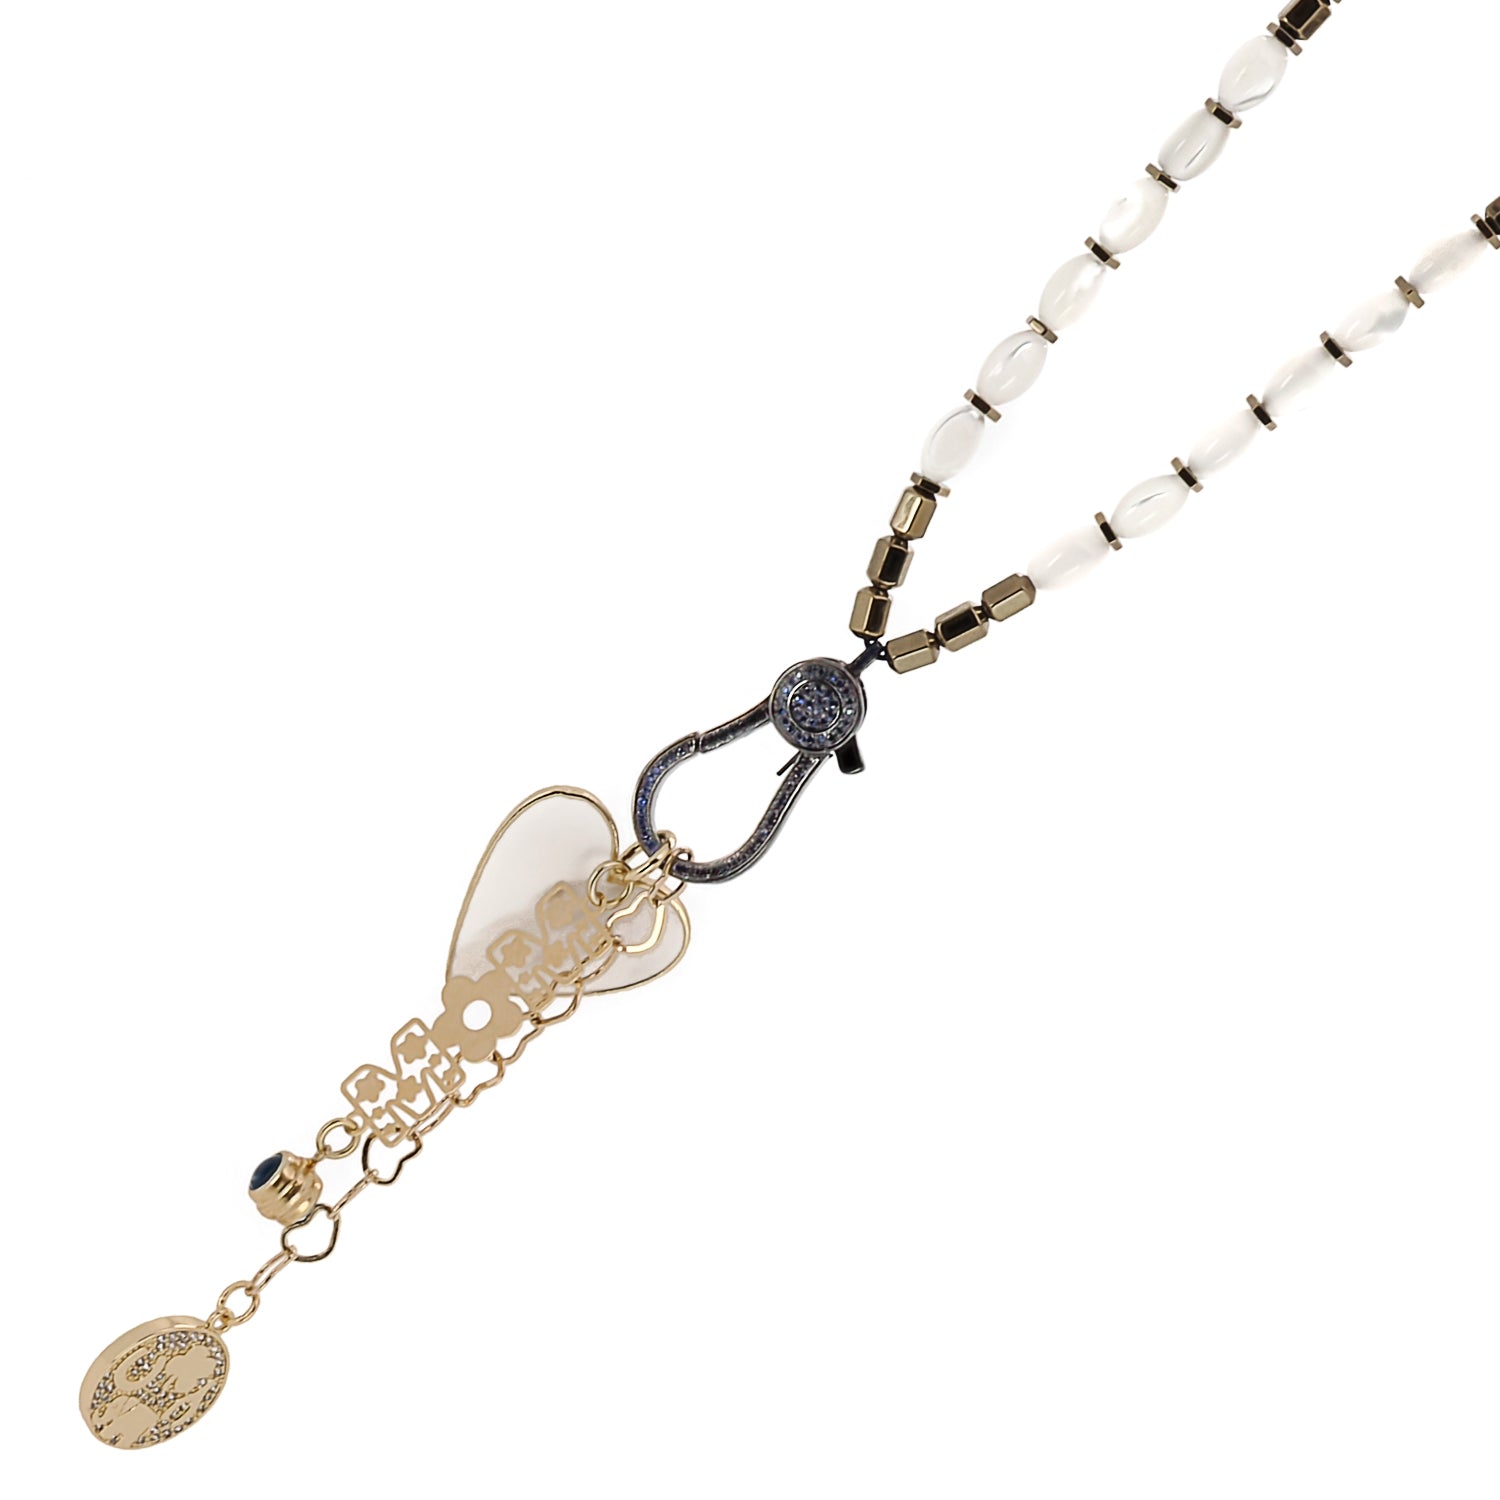 The 24k gold plated "mom" charm on the Pure Love Mom Necklace, symbolizing the special bond between a mother and child.